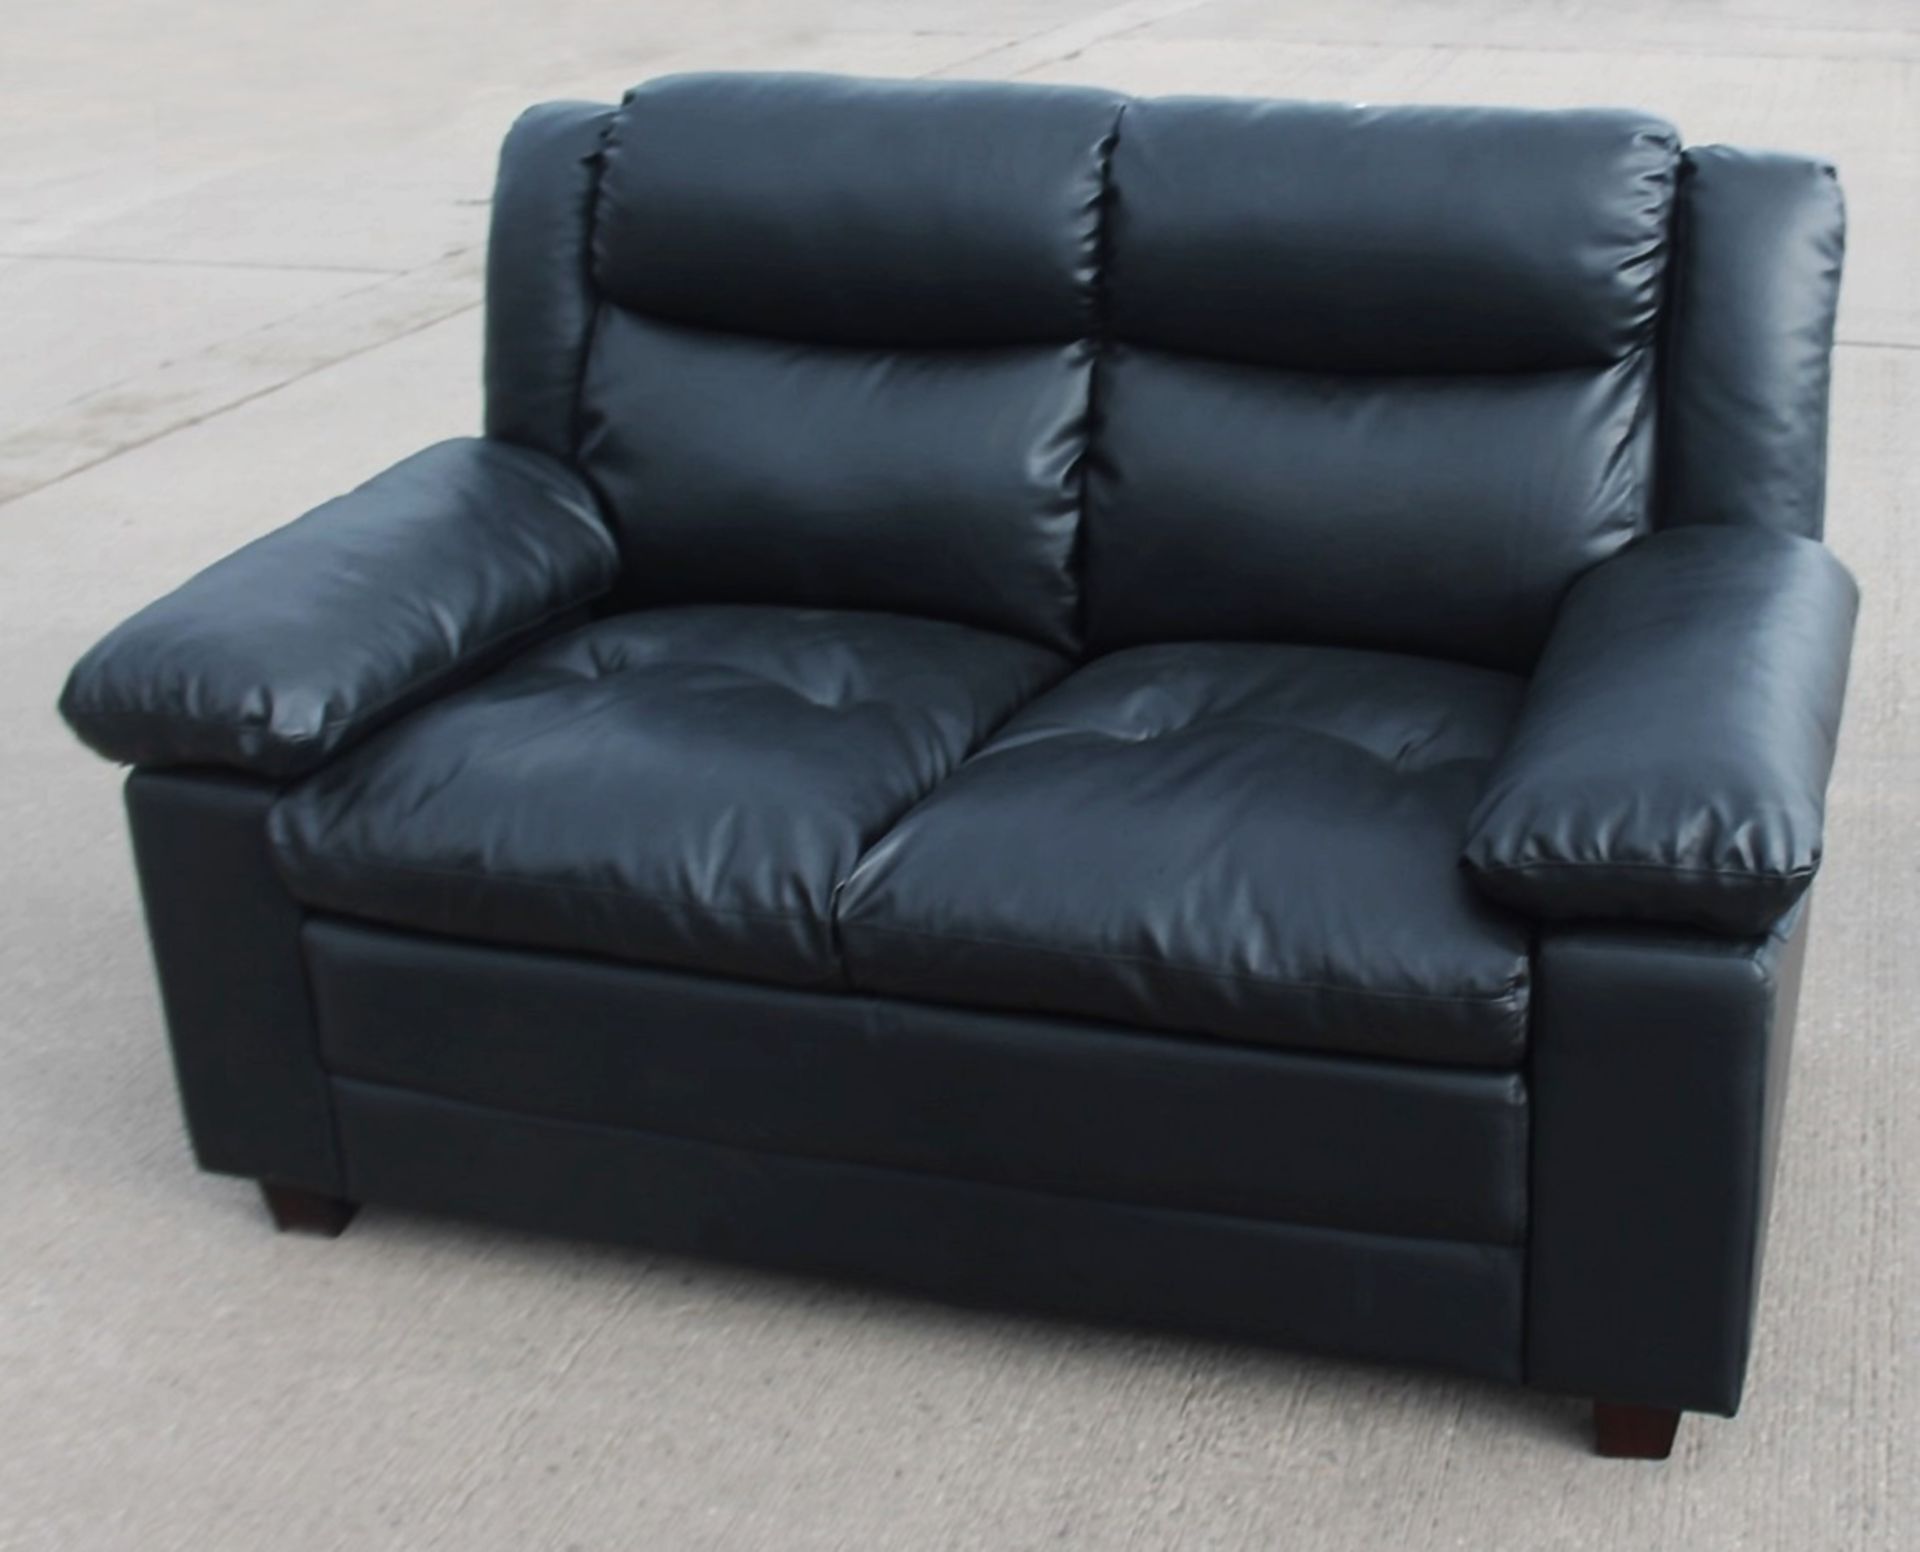 1 x 2-Seater Sofa, Upholstered In A Premium Black Faux Leather - From An Exclusive Property - NO VAT